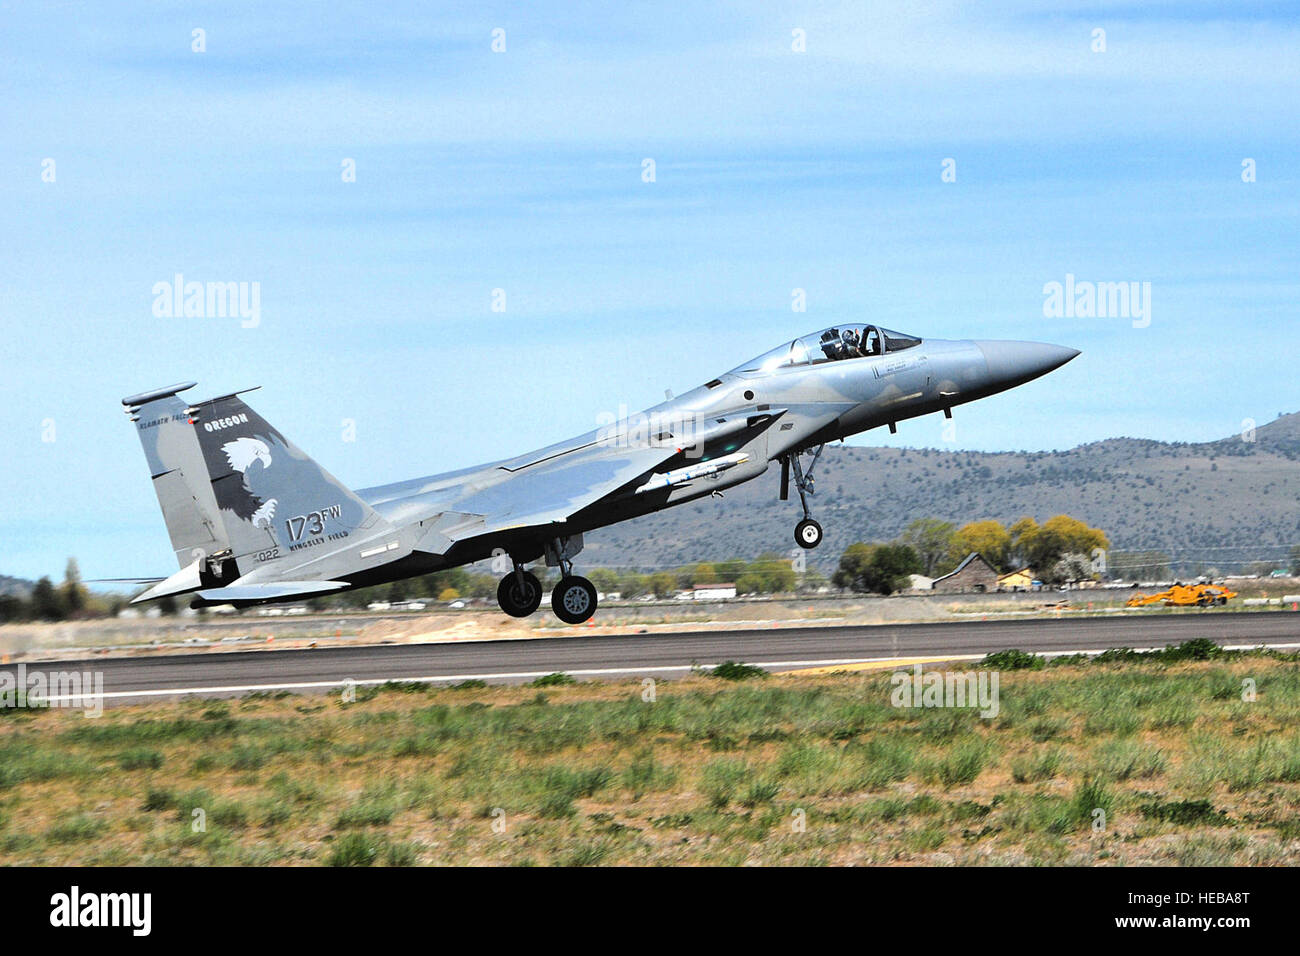 Colonel Tom Schiess, 173rd Fighter Wing Commander, lands an F-15 Eagle on the runway after his final fllight at Kingsley Field,  Klamath Falls, Oregon on May 17, 2008.  Schiesstook his final flight in a n F-15 Eagle as he gives up command of the 173rd Fighter Wing.   Tech. Sgt. Jennifer Shirar, Released) Stock Photo